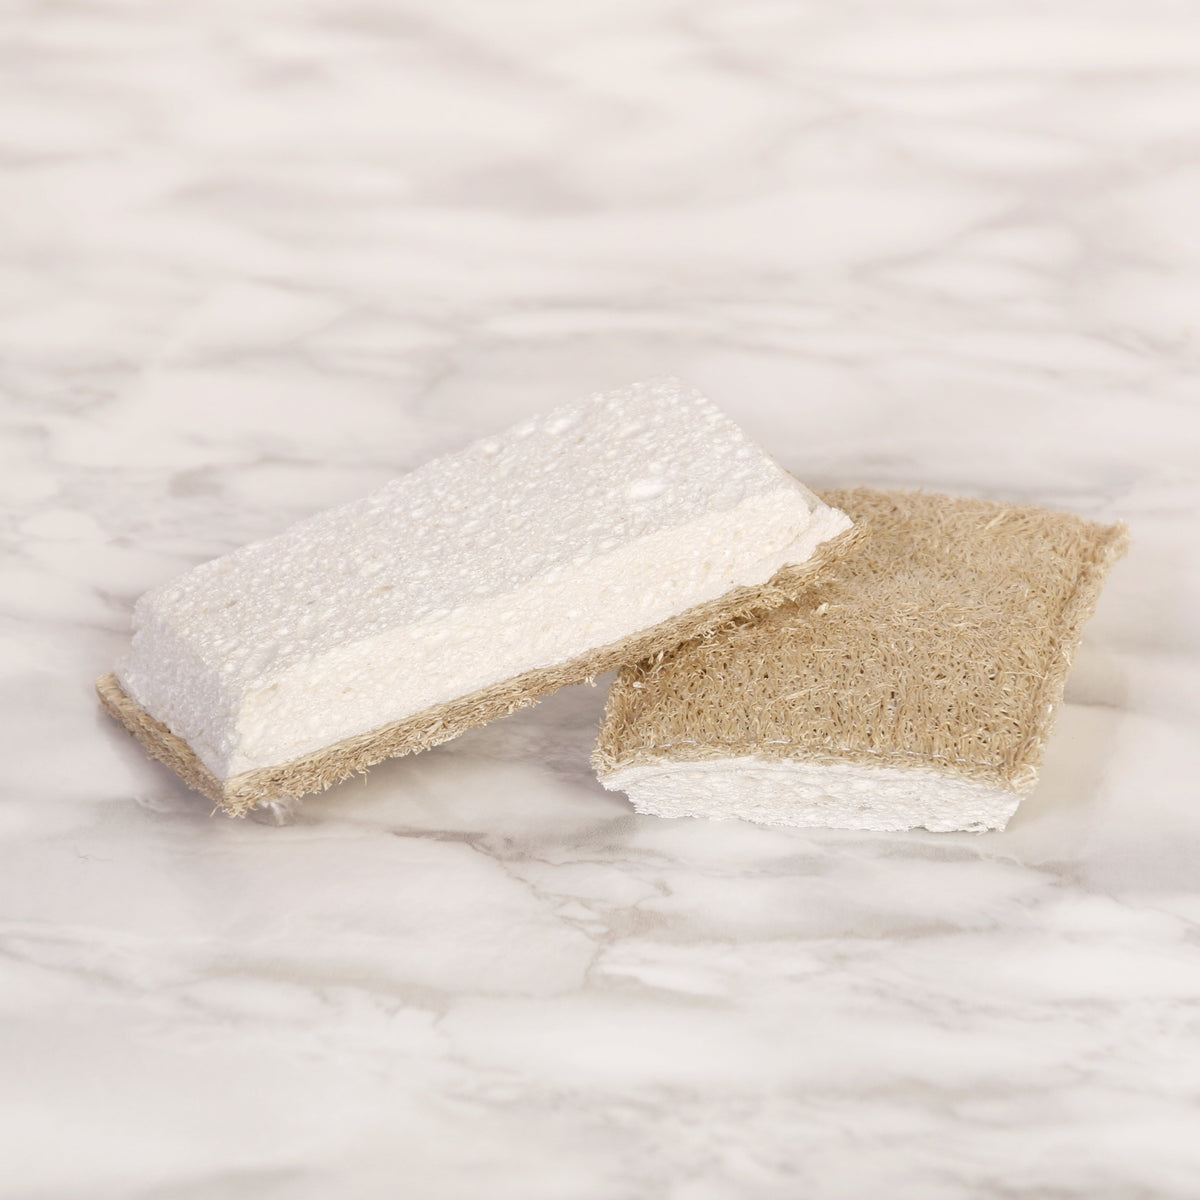 Loofah Body Sponge, From a Natural Plant, Plastic-Free